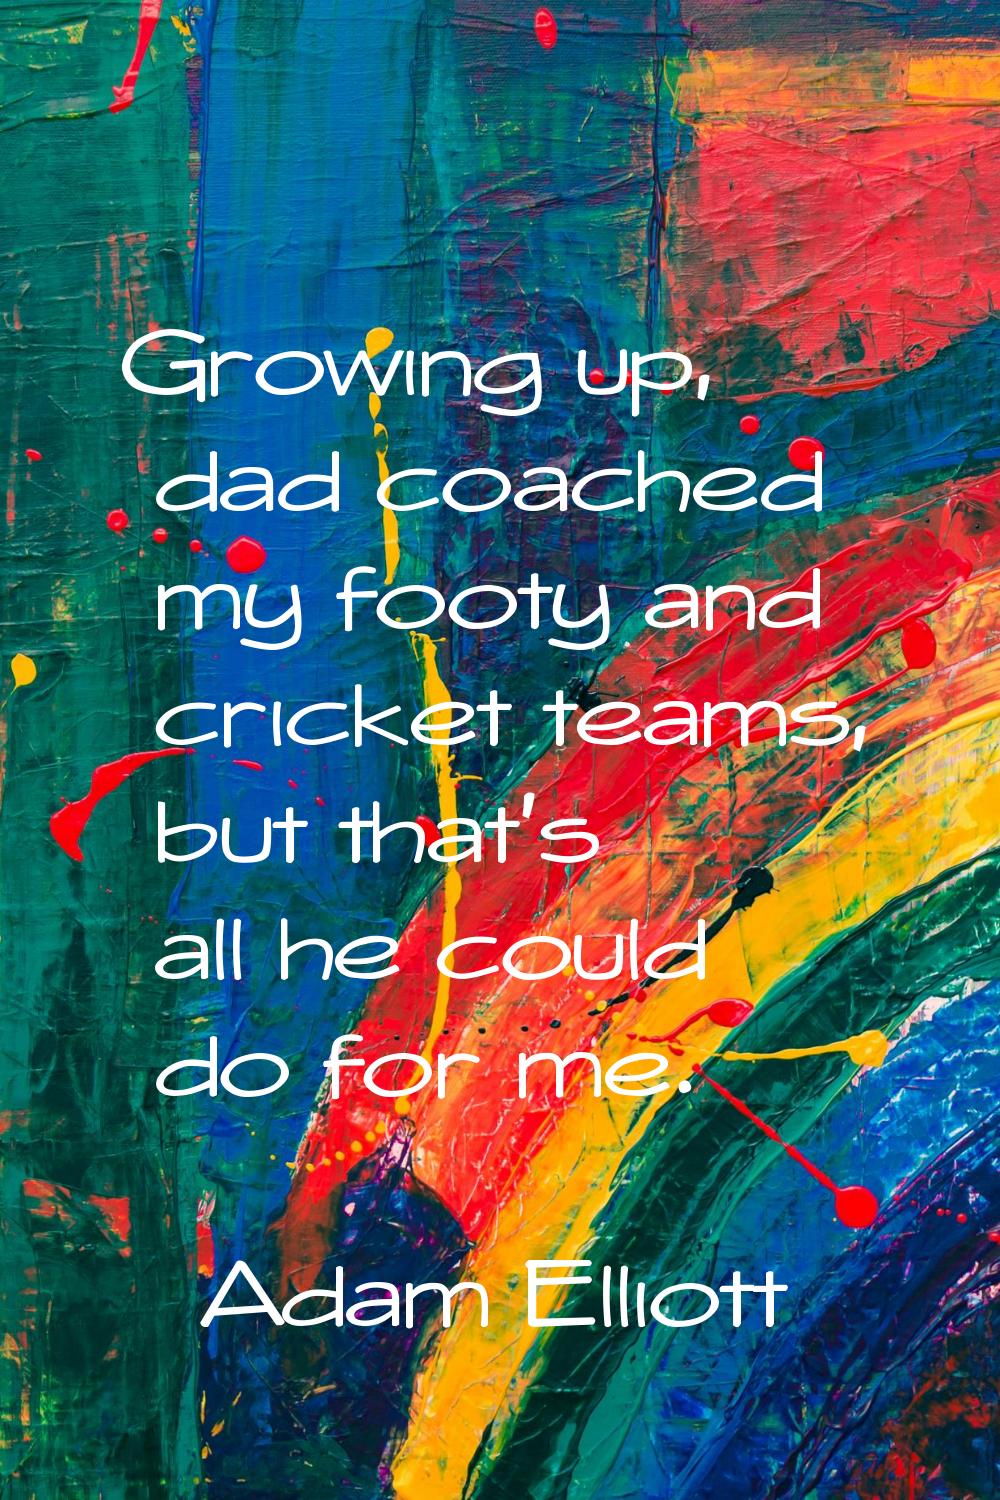 Growing up, dad coached my footy and cricket teams, but that's all he could do for me.